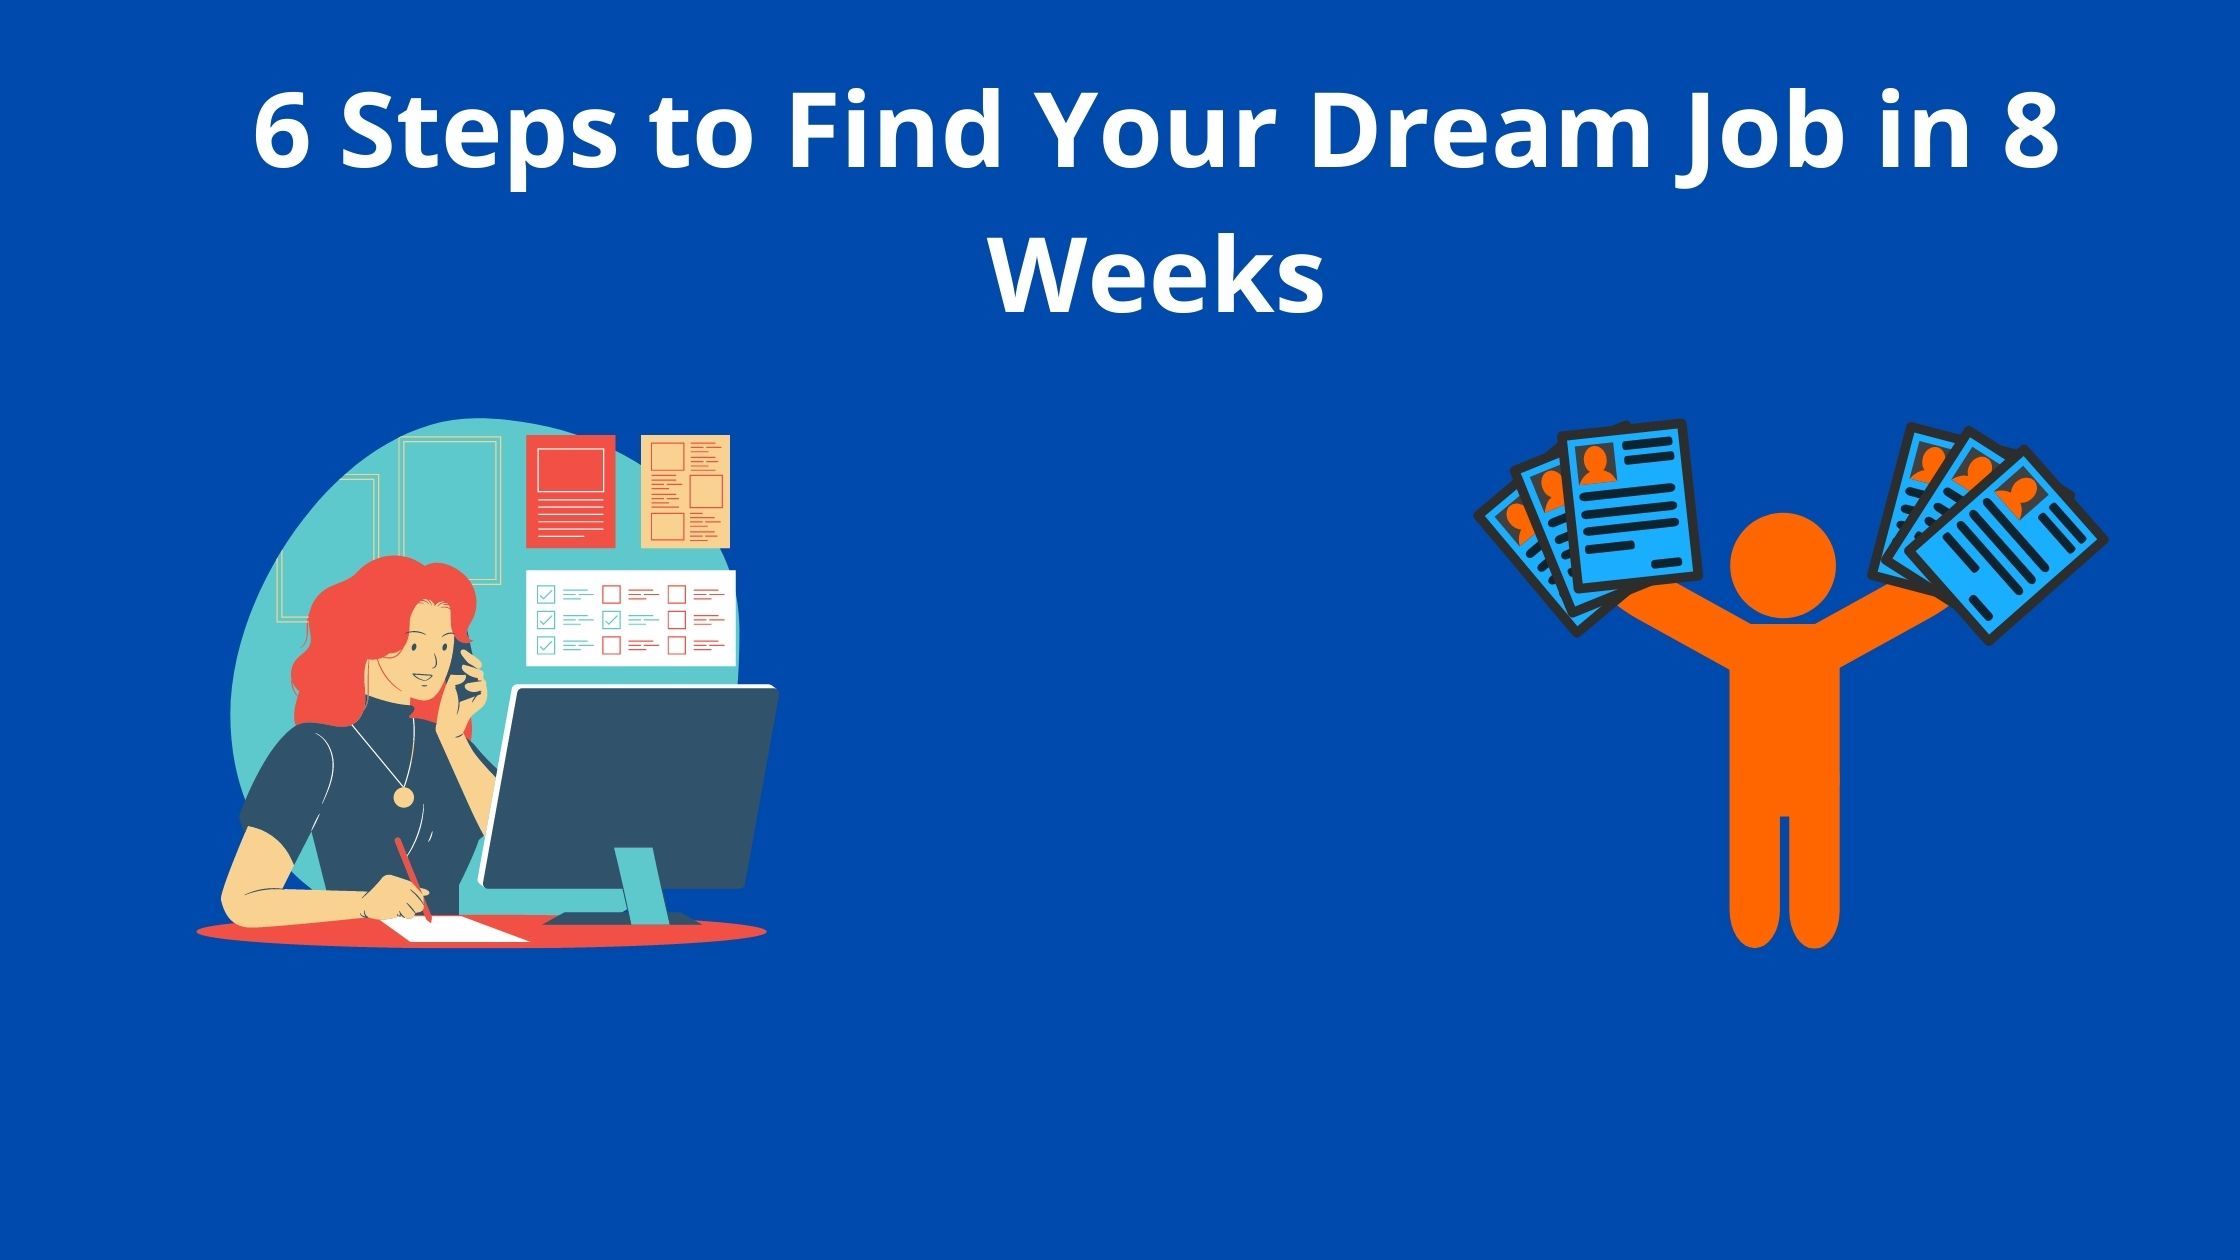 6 Steps to Find Your Dream Job in 8 Weeks